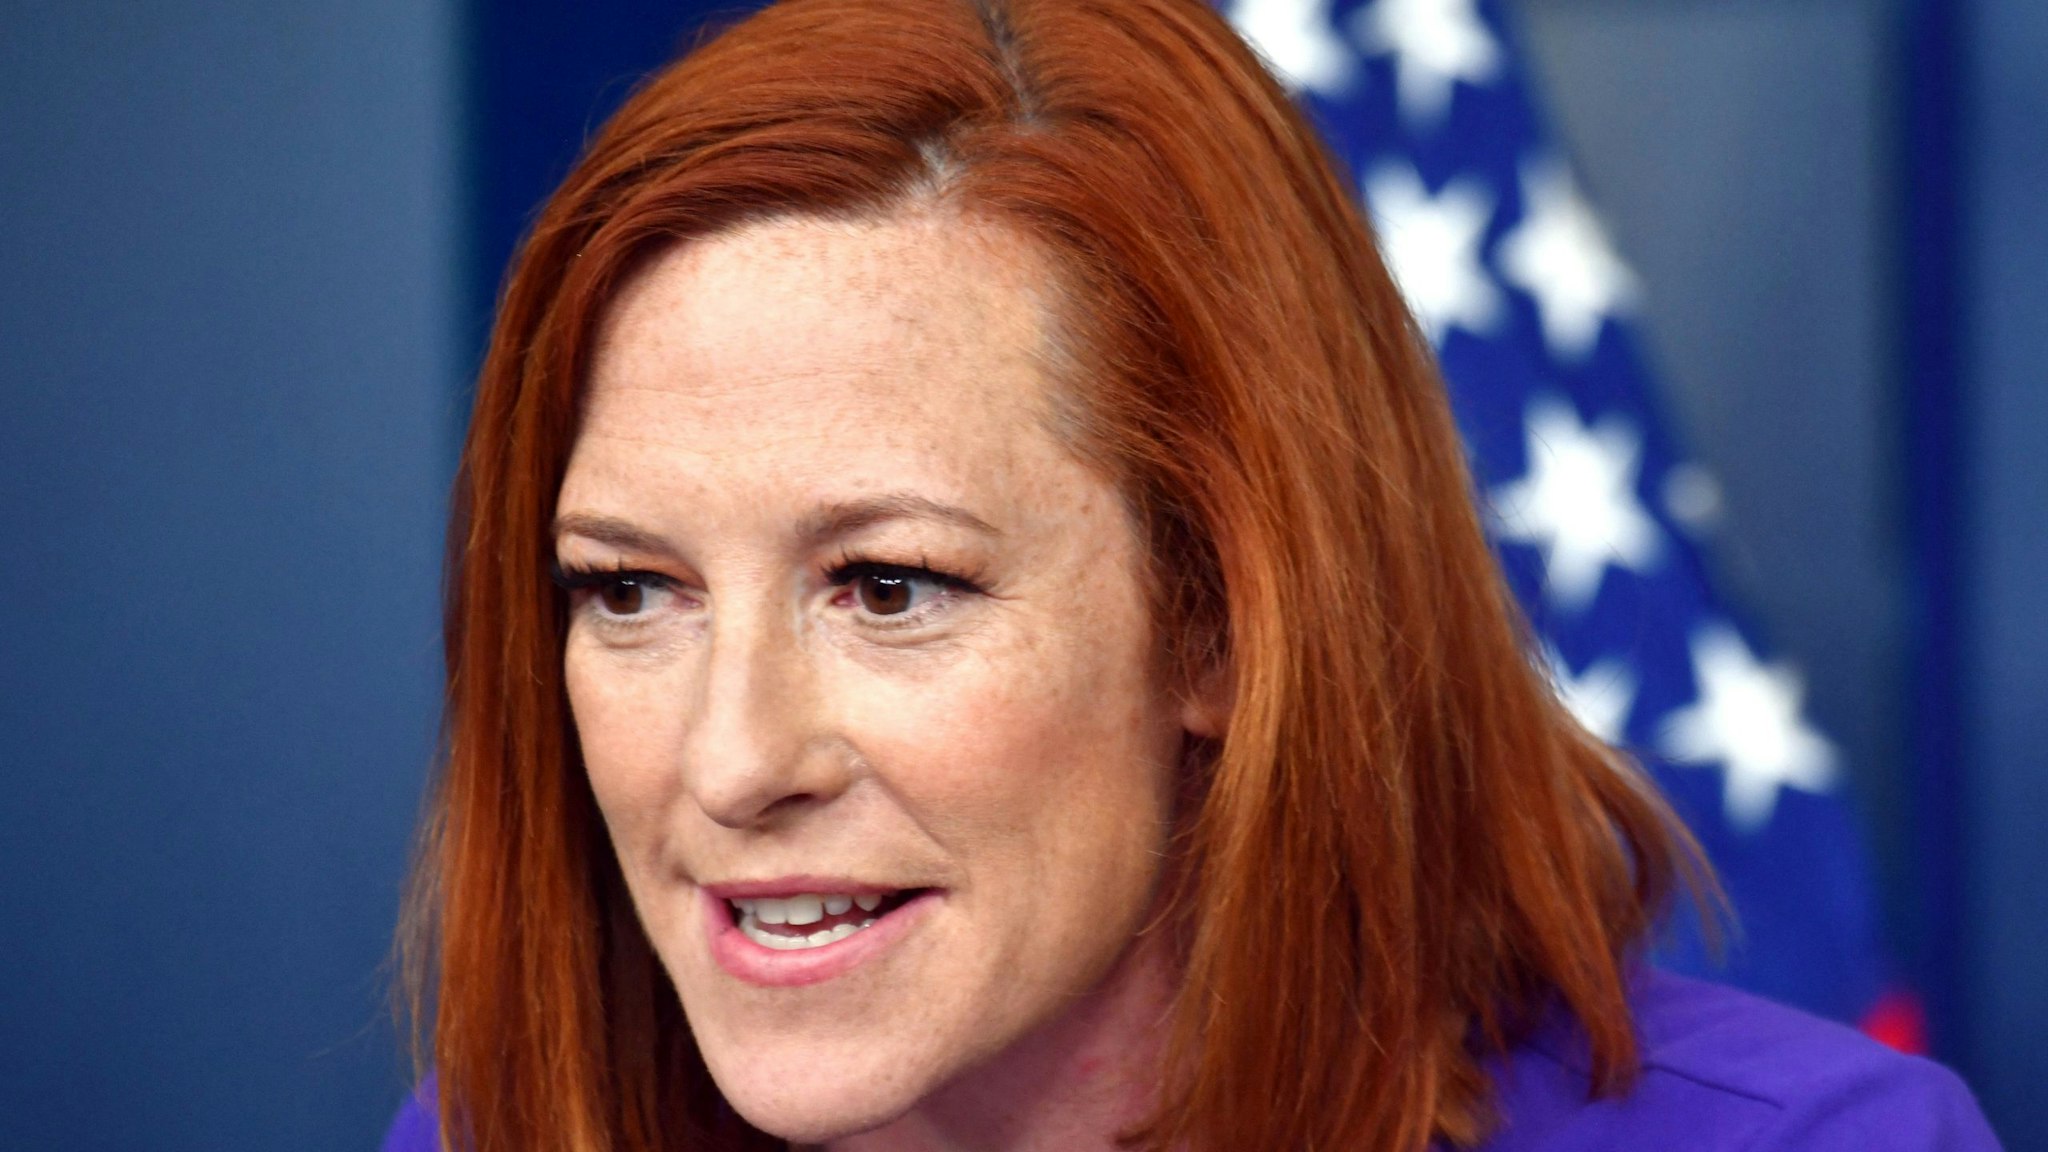 White House Press Secretary Jen Psaki speaks during the daily briefing in the Brady Briefing Room of the White House in Washington, DC on June 25, 2021.